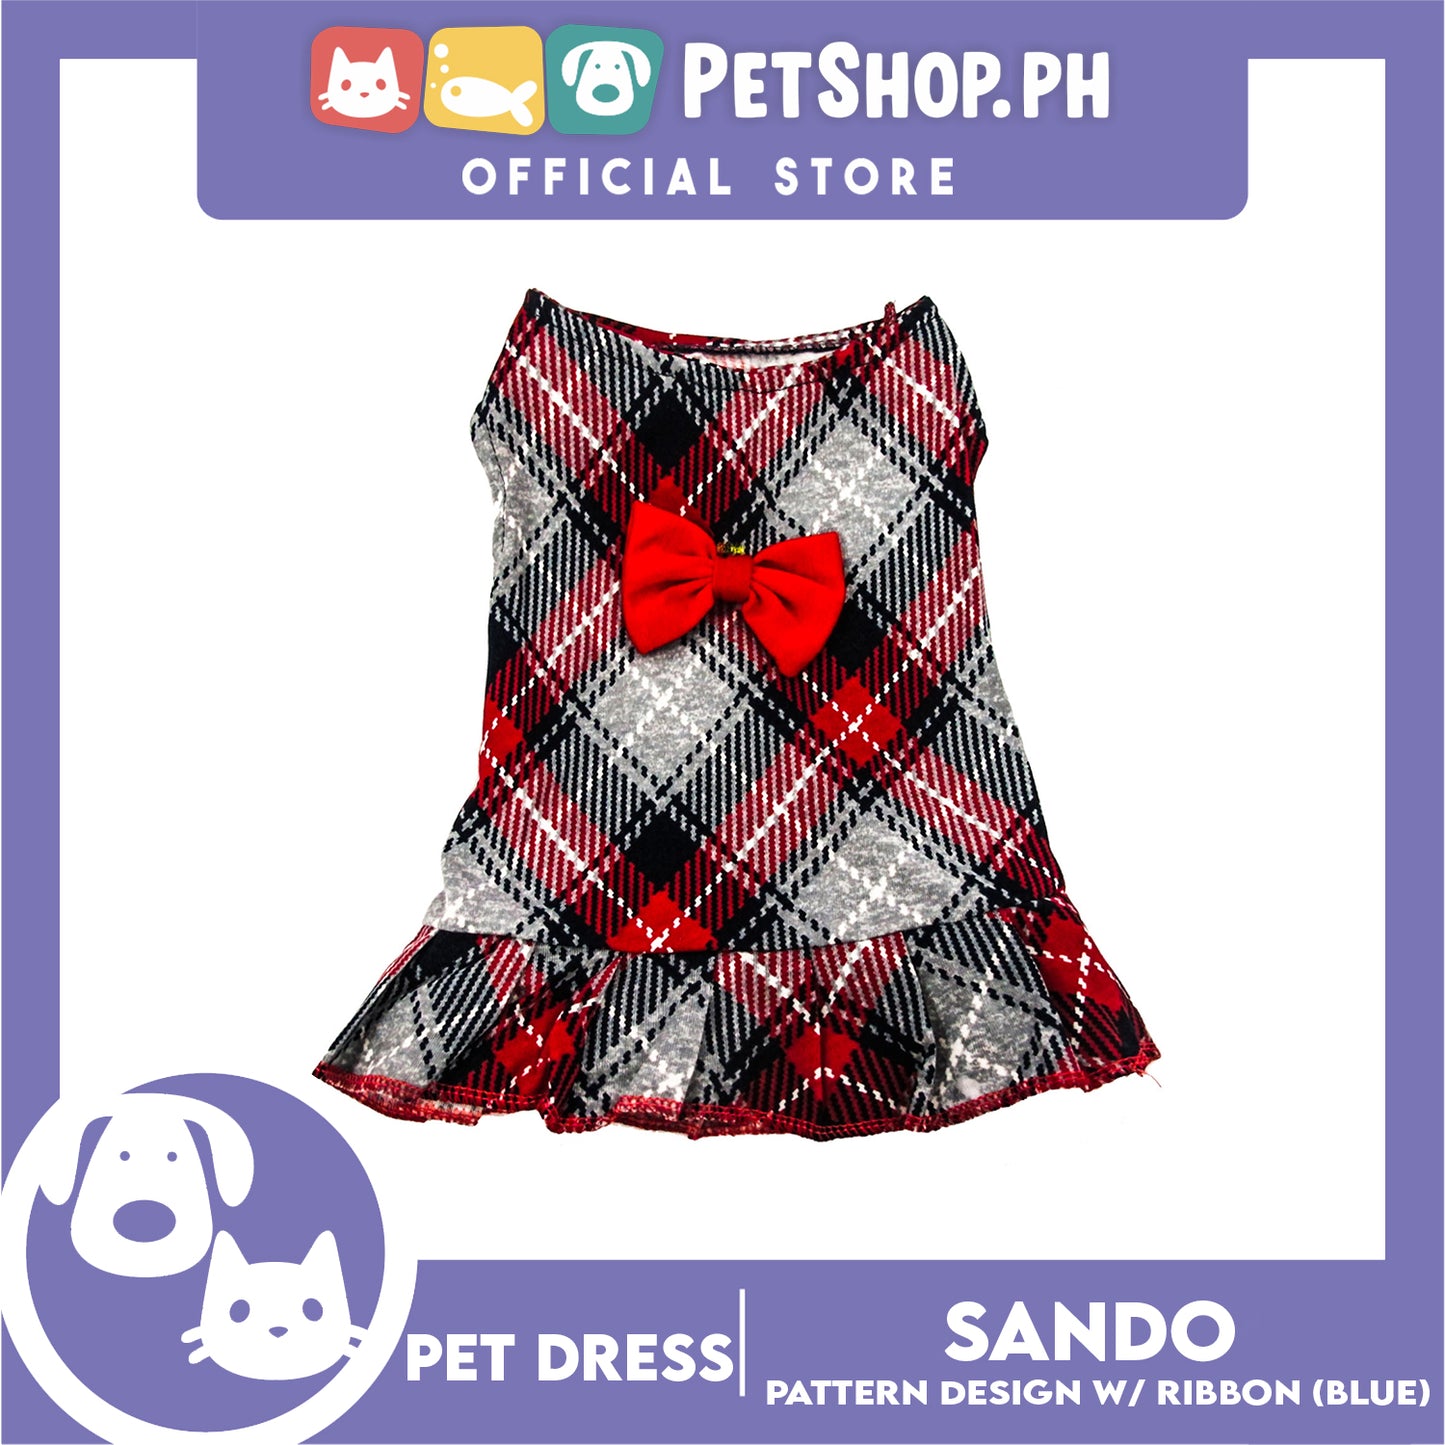 Pet Dress Summer Blue Checkered Skirt with Red Ribbon (Extra Large) for Small Dog and Cat